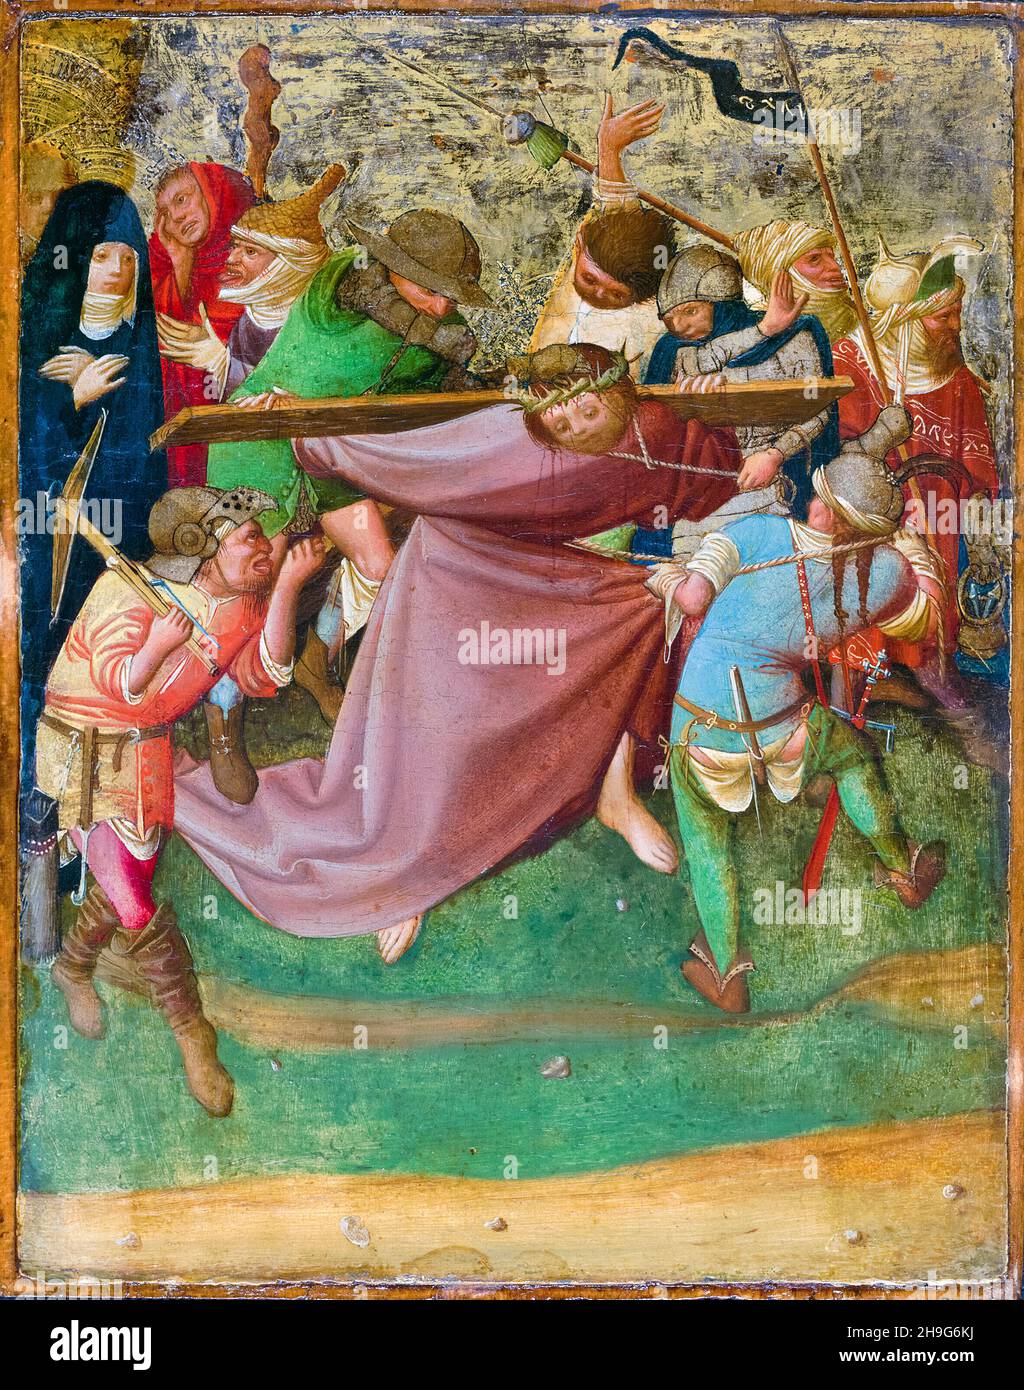 Christ Carrying the Cross, 15th Century German painting by Master of the Worcester Panel, 1420-1425 Stock Photo